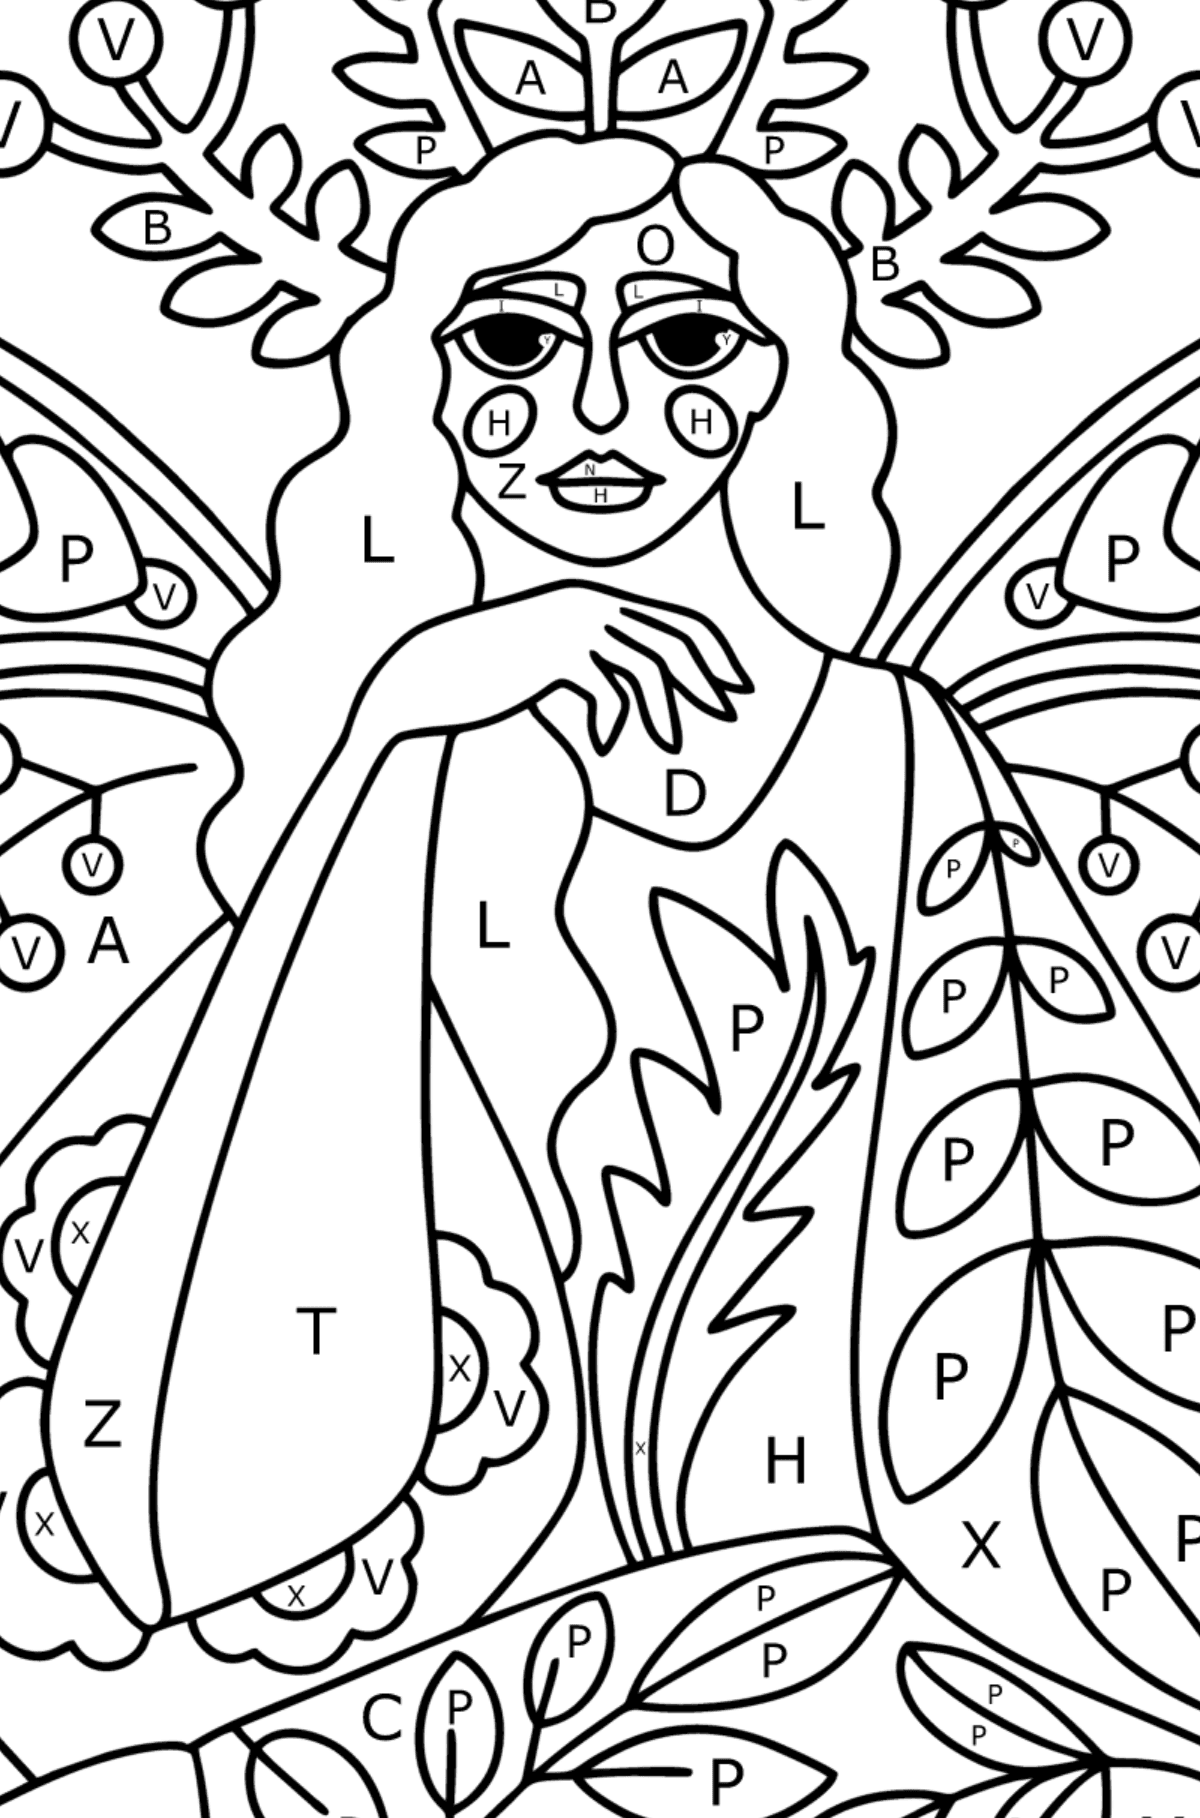 Fairy Tattoo (difficult) coloring page - Coloring by Letters for Kids